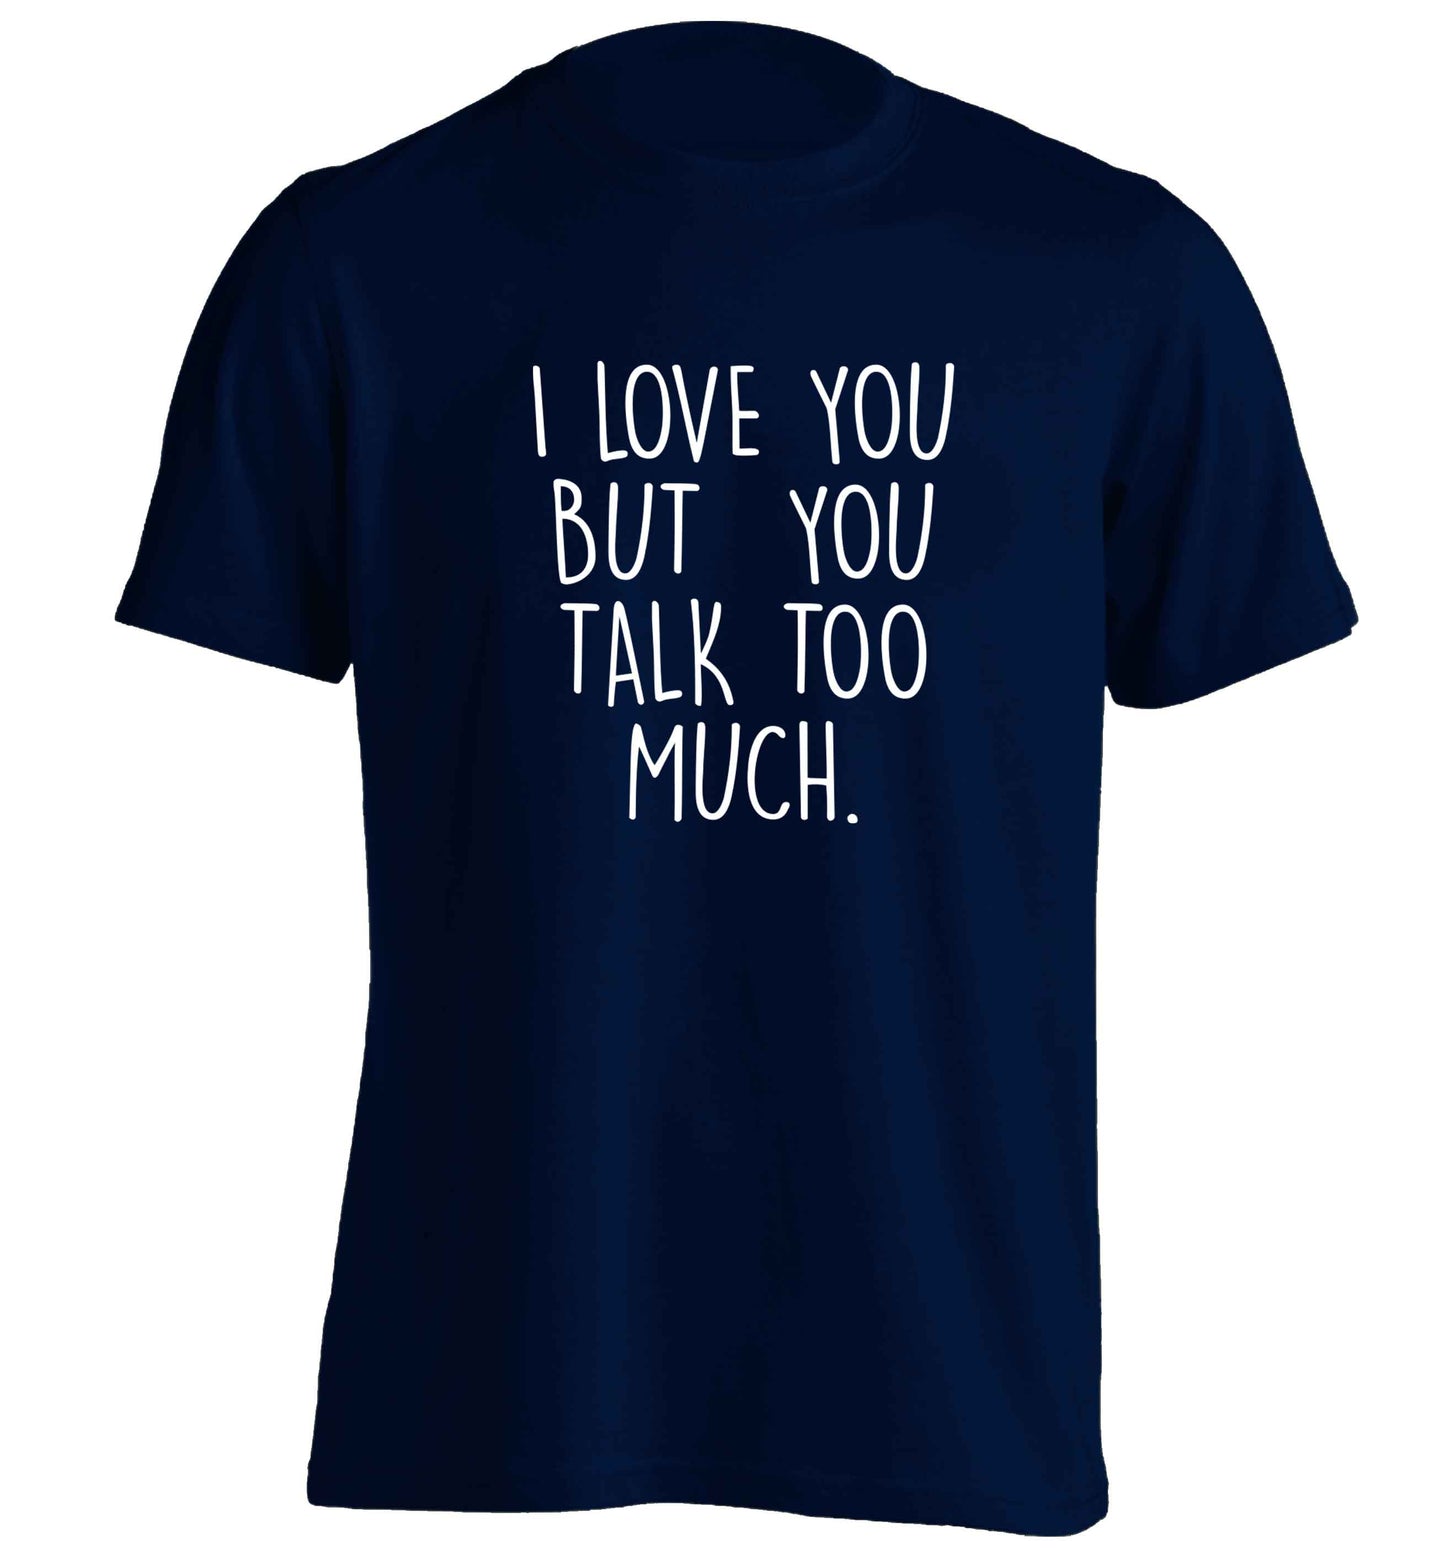 I love you but you talk too much adults unisex navy Tshirt 2XL